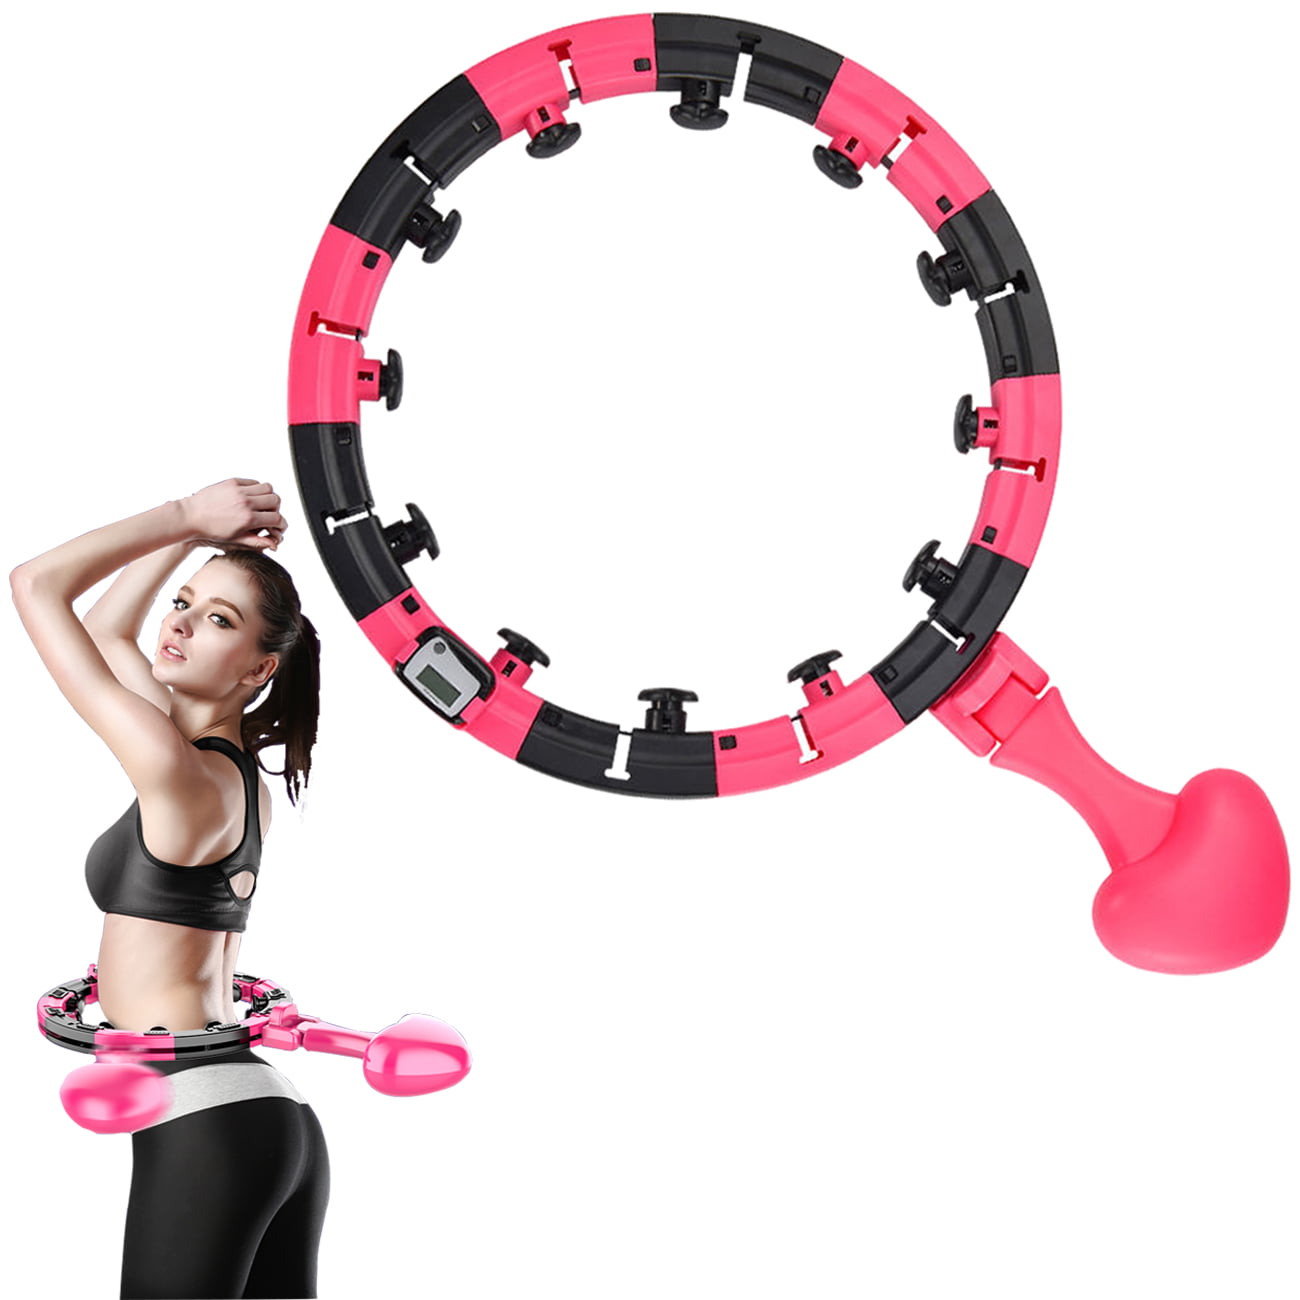 Weighted Hoola Hoop For Adults Weight Loss,Hula Hoop For Exercise Plus Size,  Hula Circle Weighted Hoops 2 in 1 Fitness Weight Loss Massage Non-Fall,Weighted  Hula Hoop With 12 Detachable Knots - Walmart.com